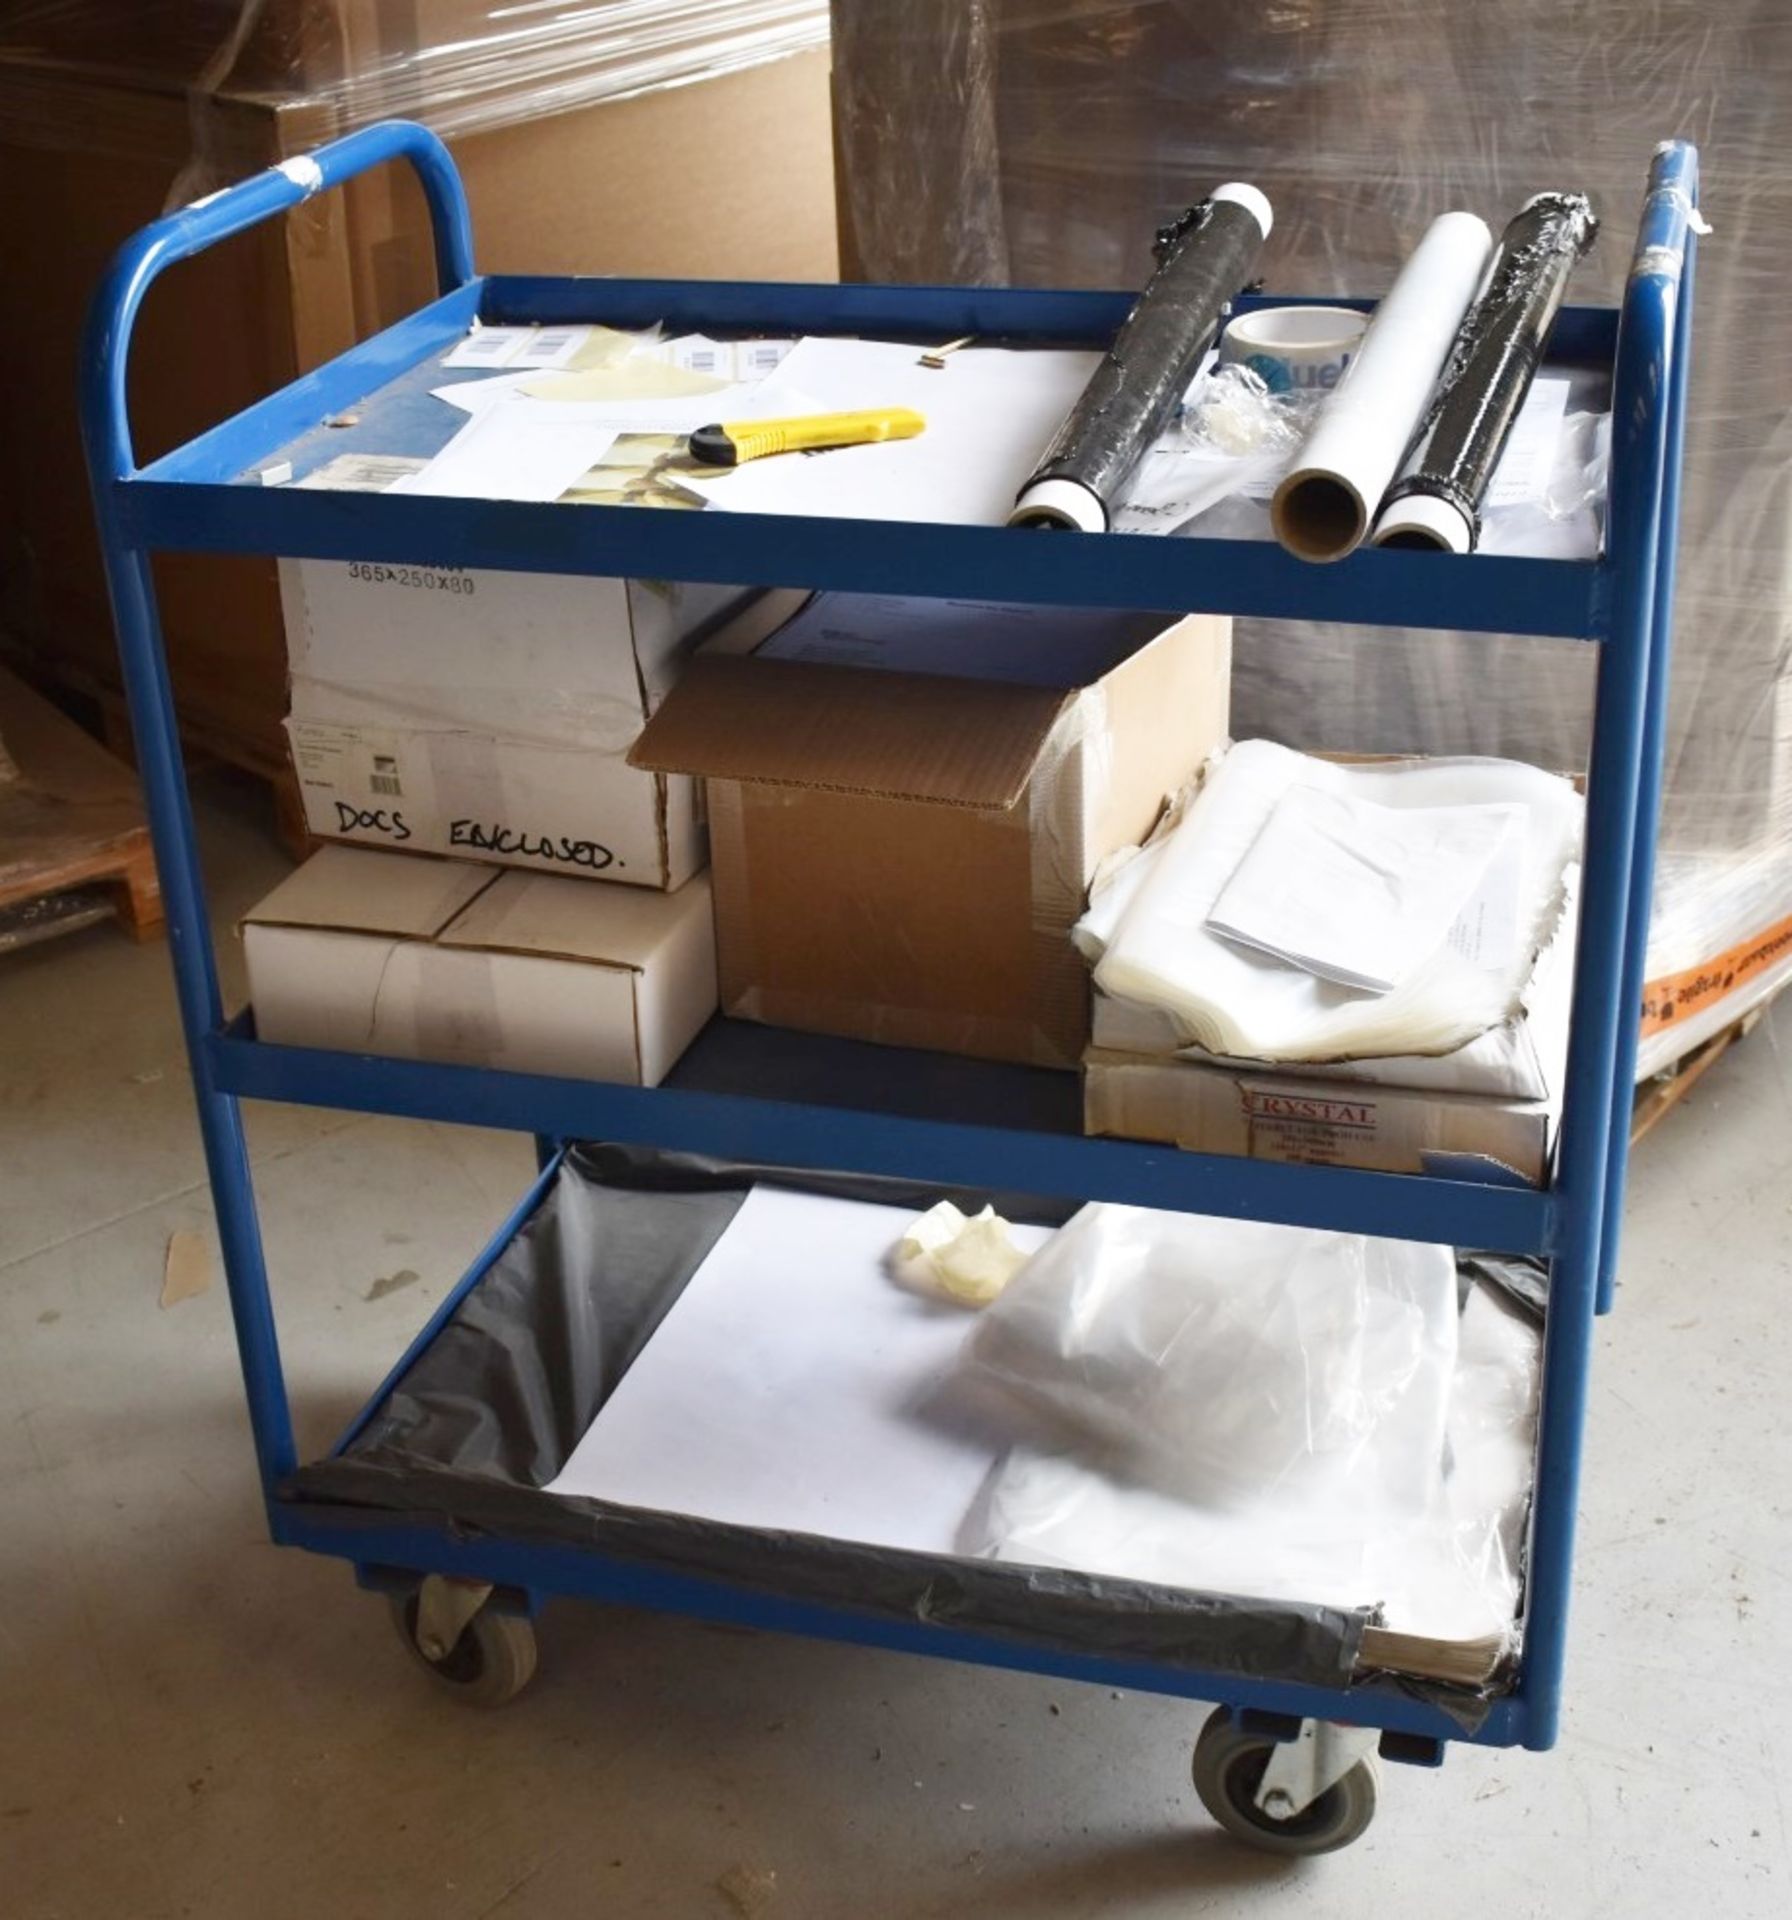 1 x Warehouse Trolley With Castors, Push/Pull Handles and Three Tier Shelves - Dimensions: H93 x W85 - Image 2 of 2